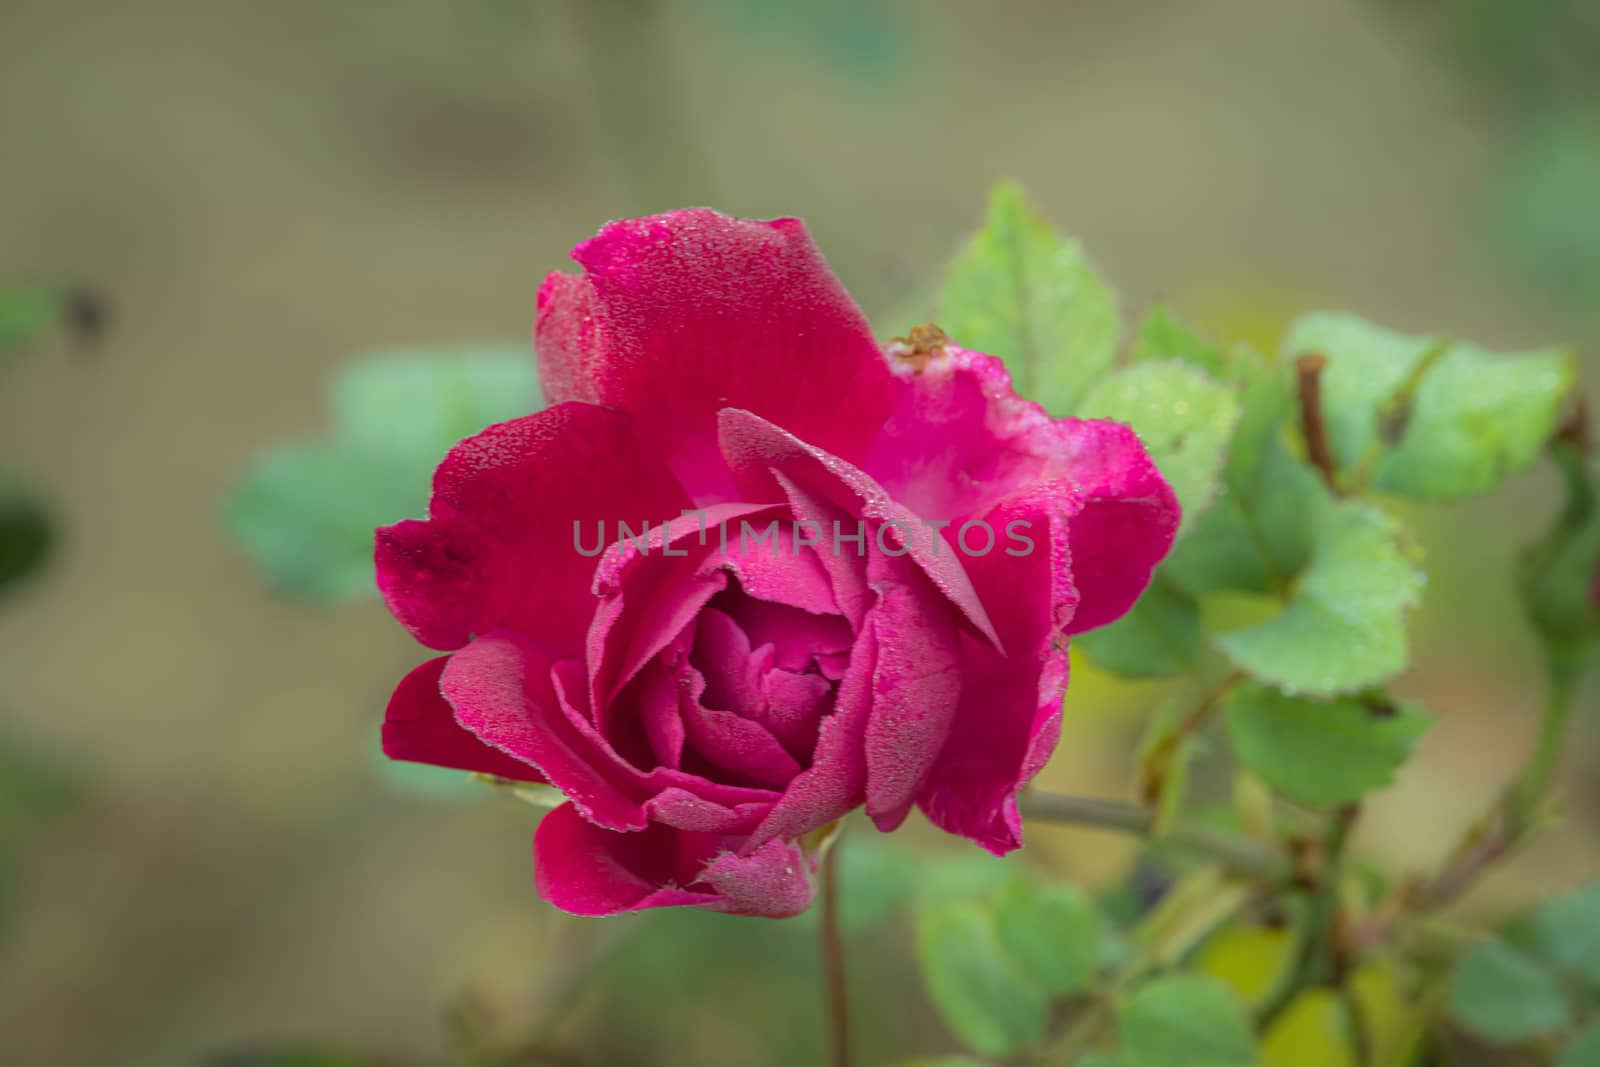 During winter, the pink rose flower blossomed with dew by 9500102400